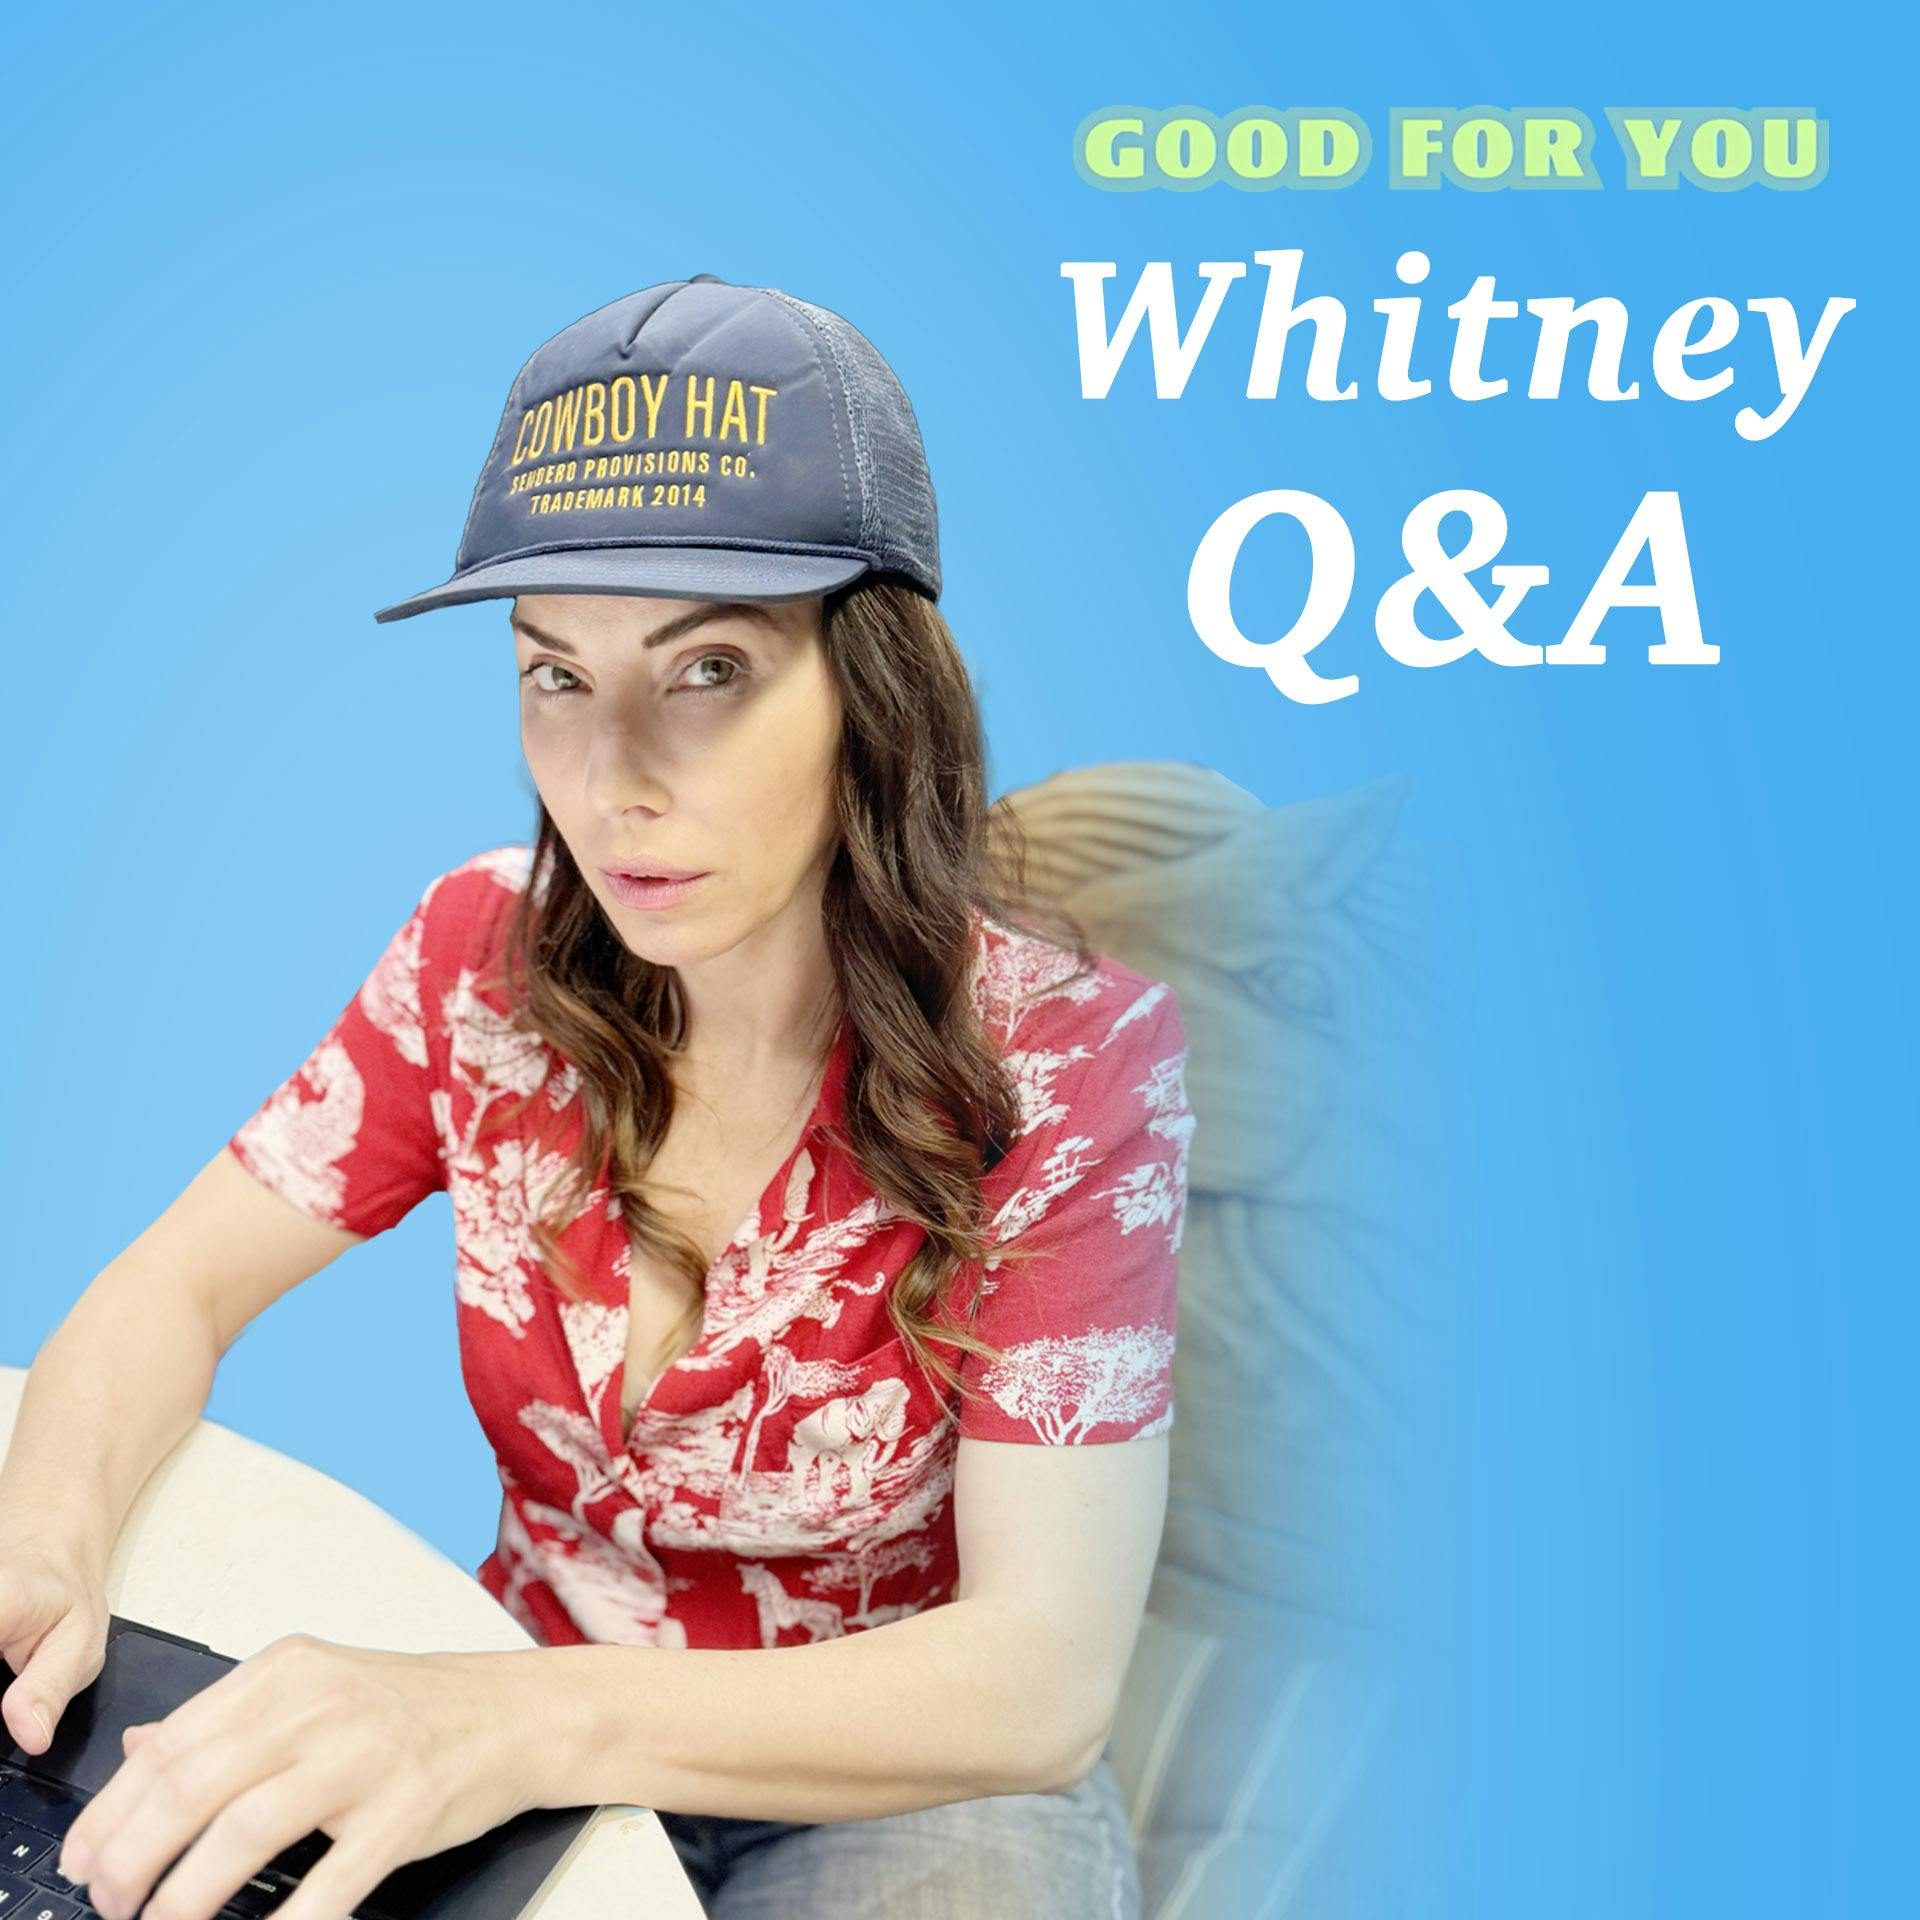 Whitney On How To Land A MILF, Ghosts, Her Birth Story & More Answers